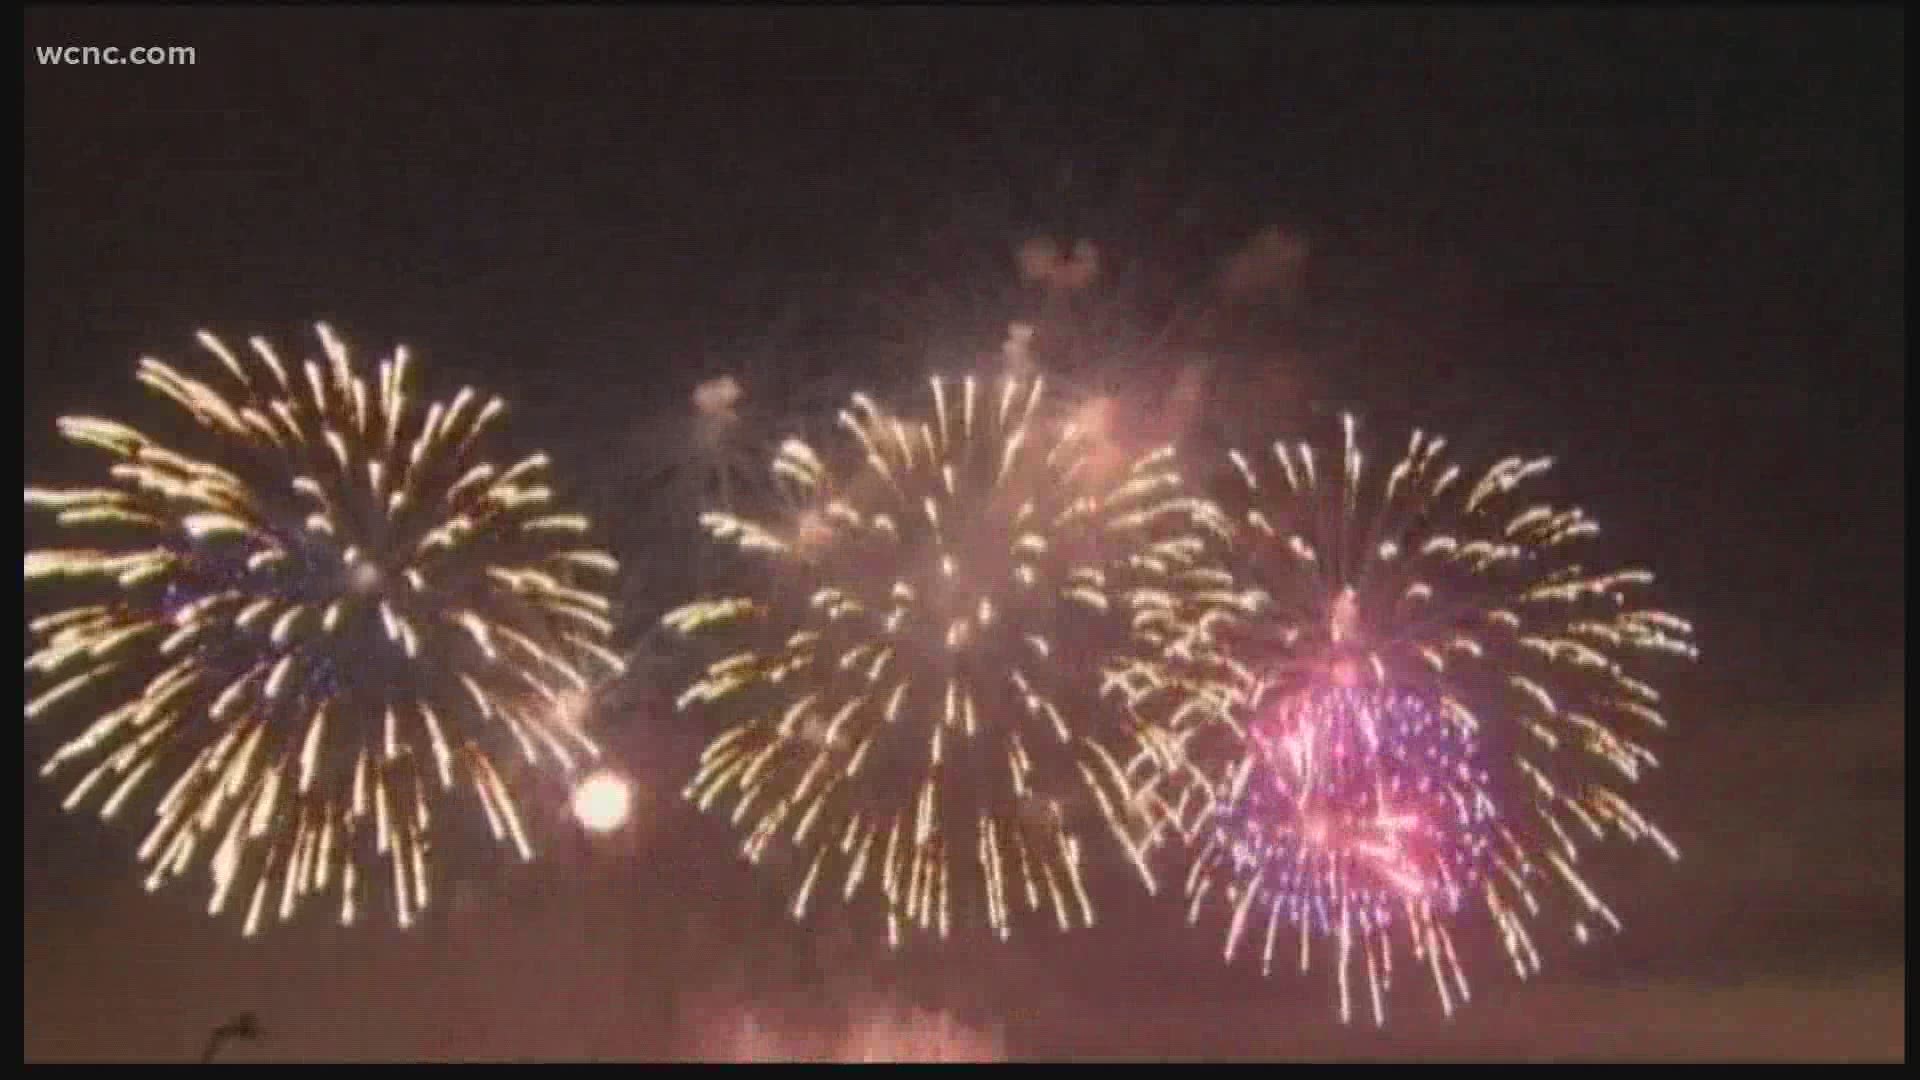 Experts believe more people will do home firework shows, and have a warning ahead of the 4th